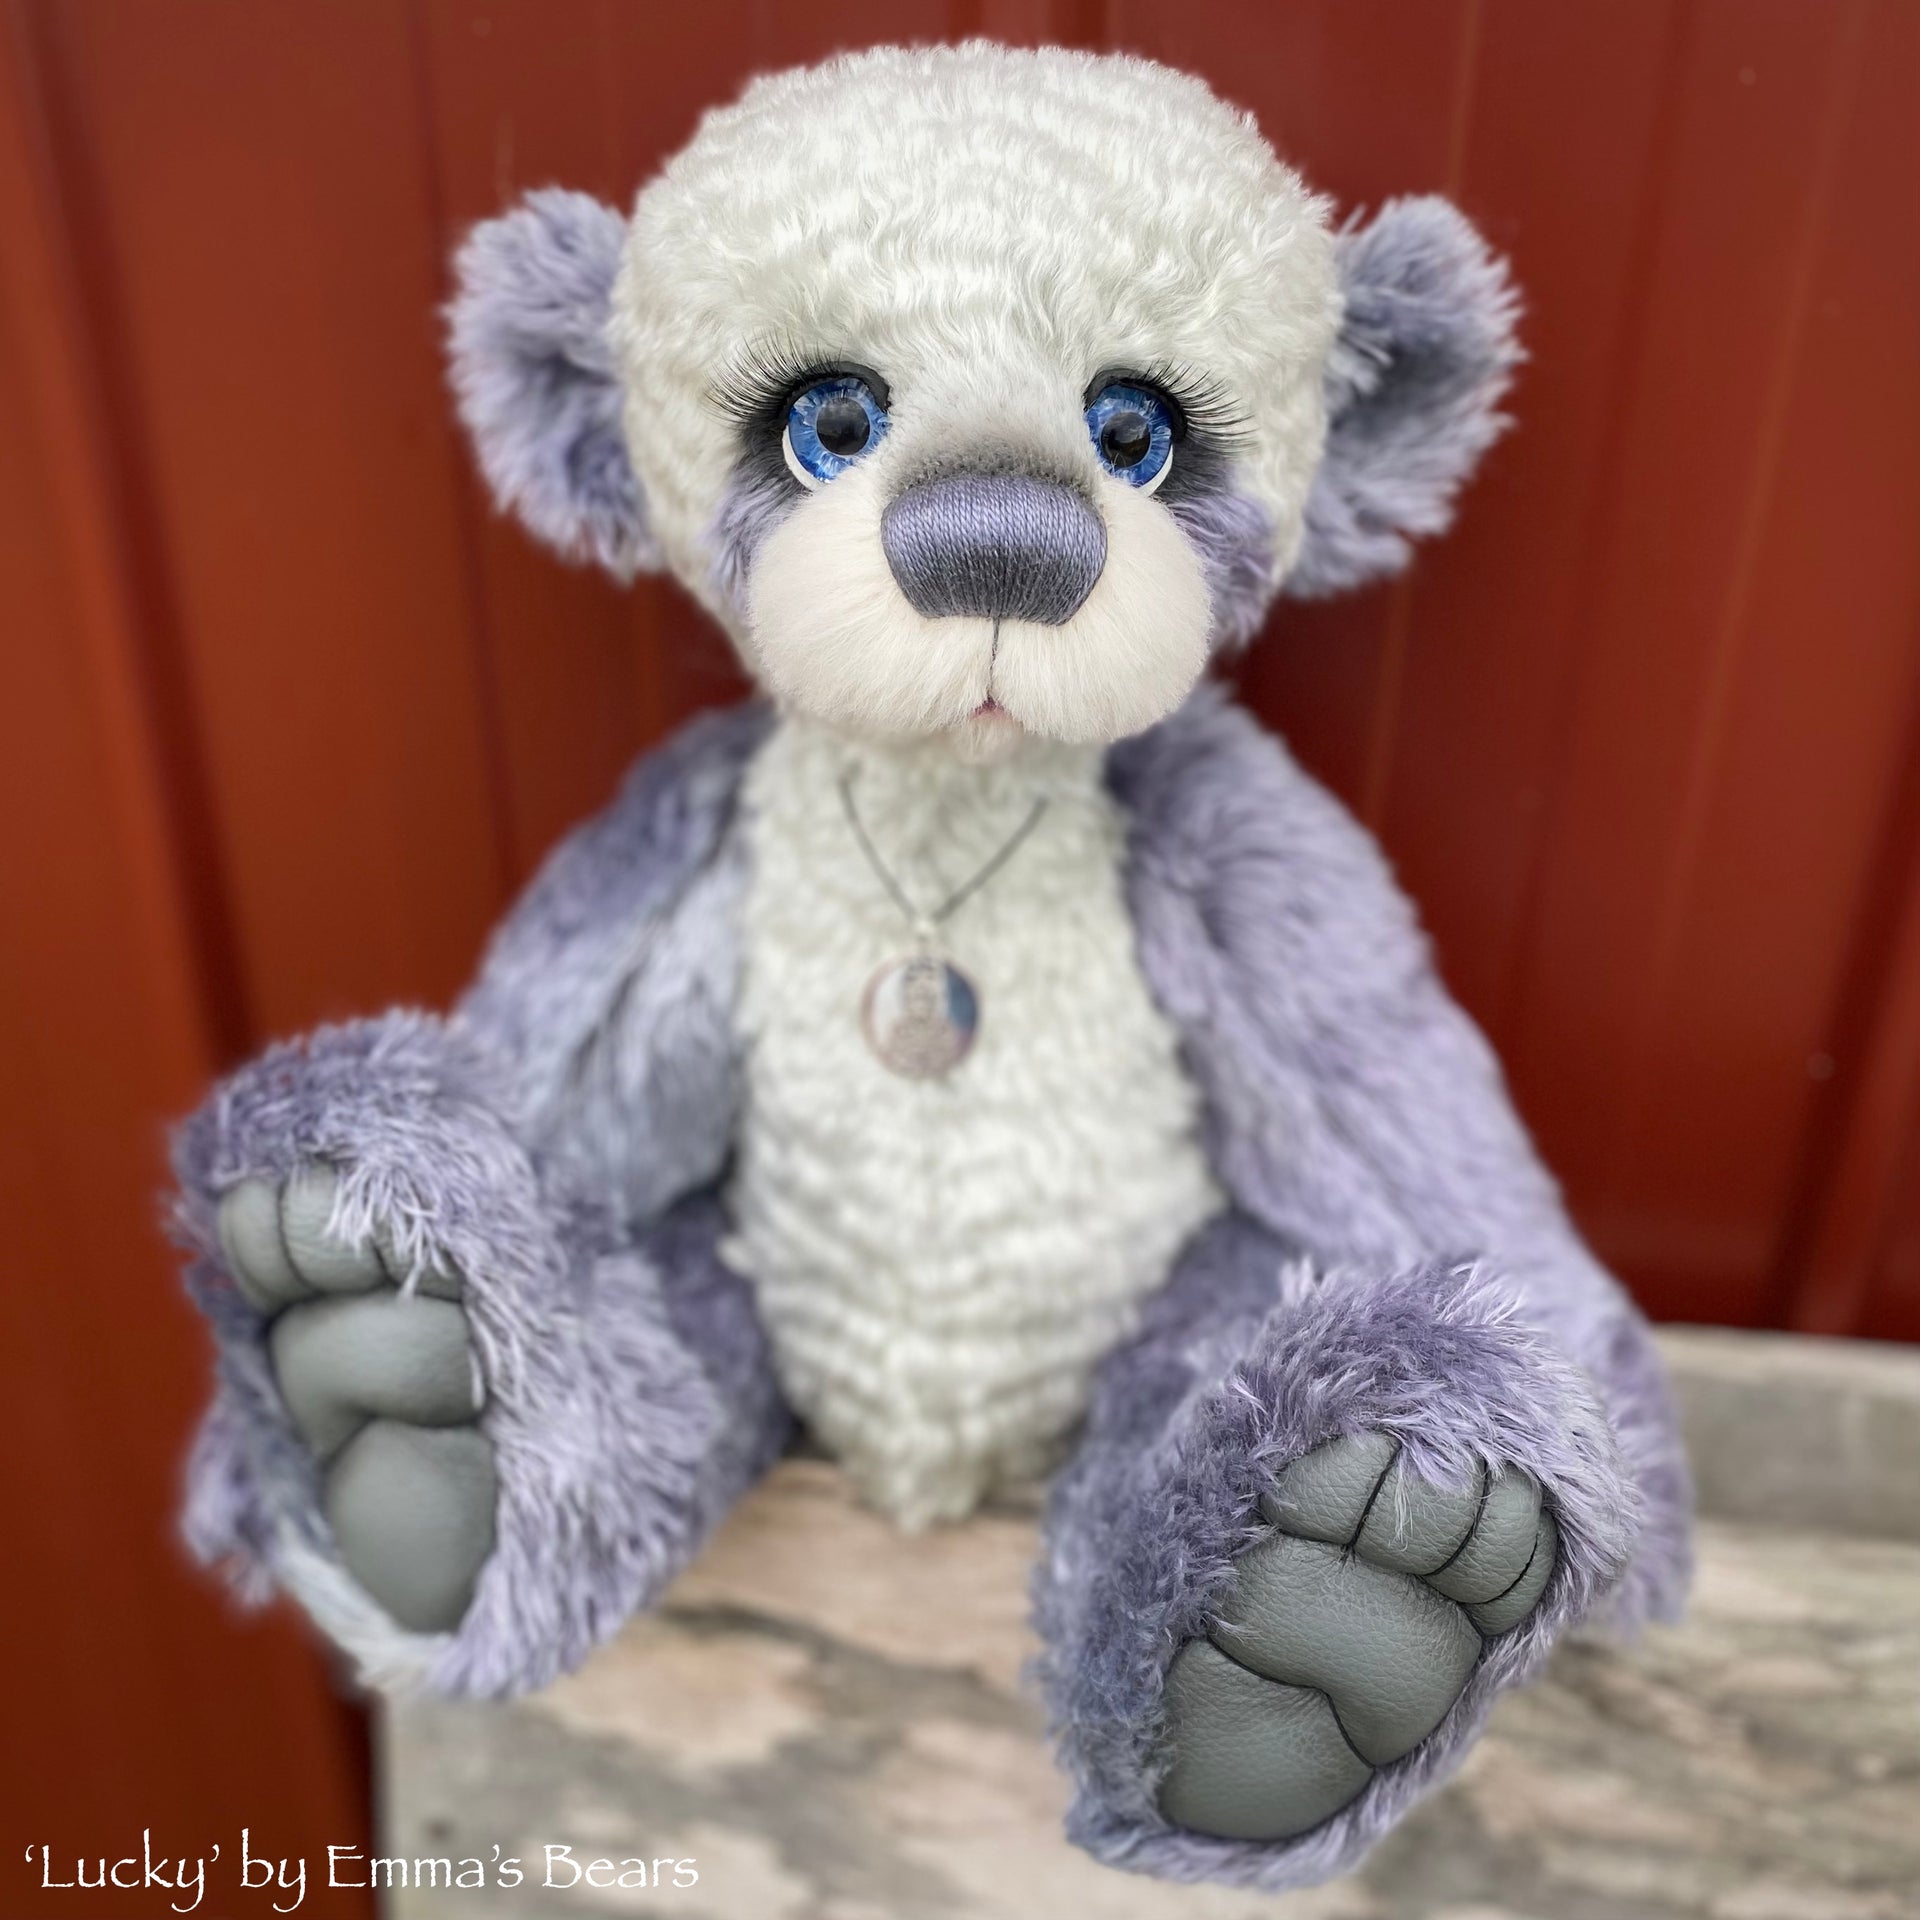 Lucky - 16" SPECIAL 25th Anniversary Collection Hand-dyed mohair Artist Bear by Emmas Bears - OOAK